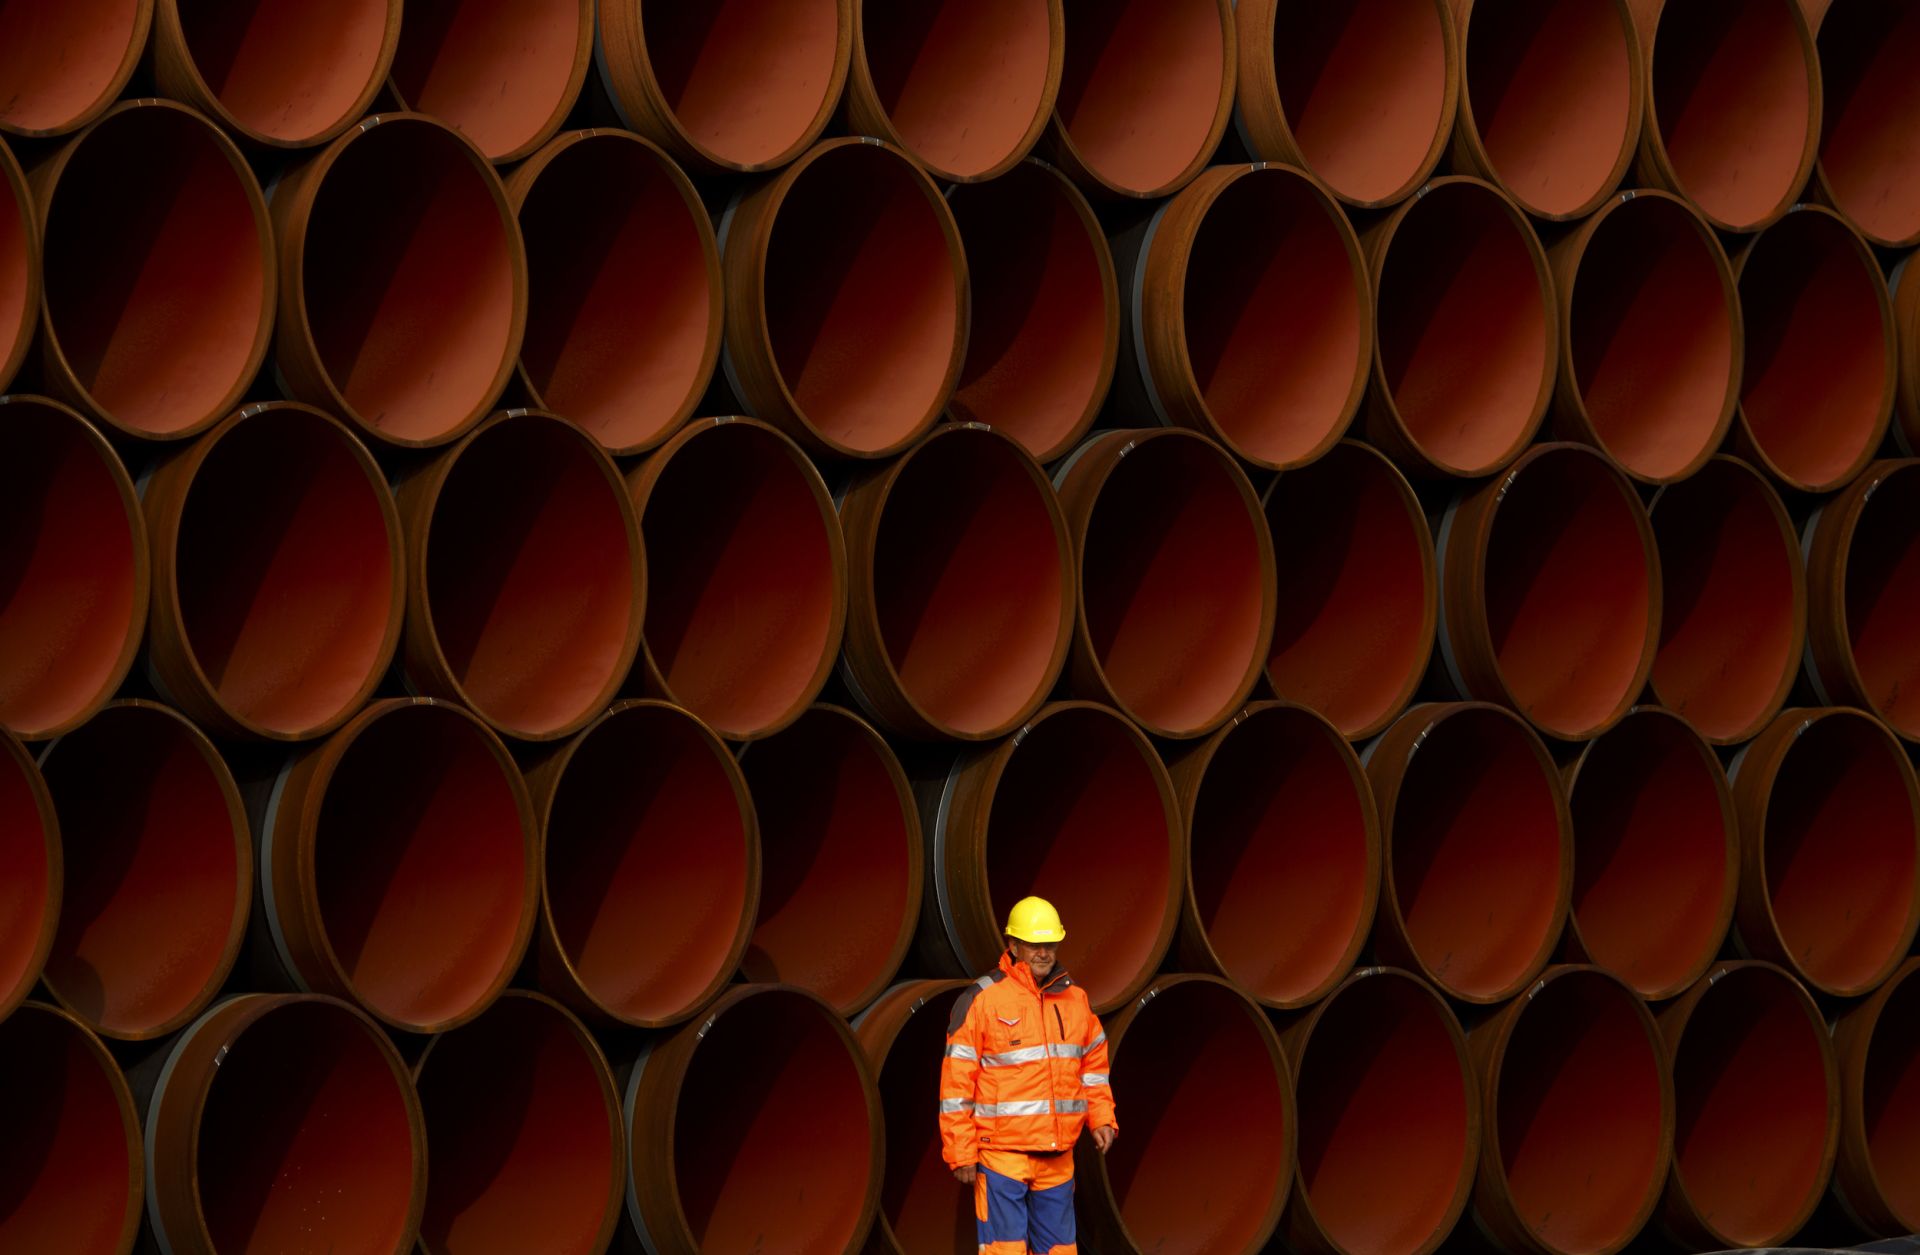 Pipes for the Nord Stream 2 pipeline lie stacked in Sassnitz, Germany, on Oct. 19, 2017.